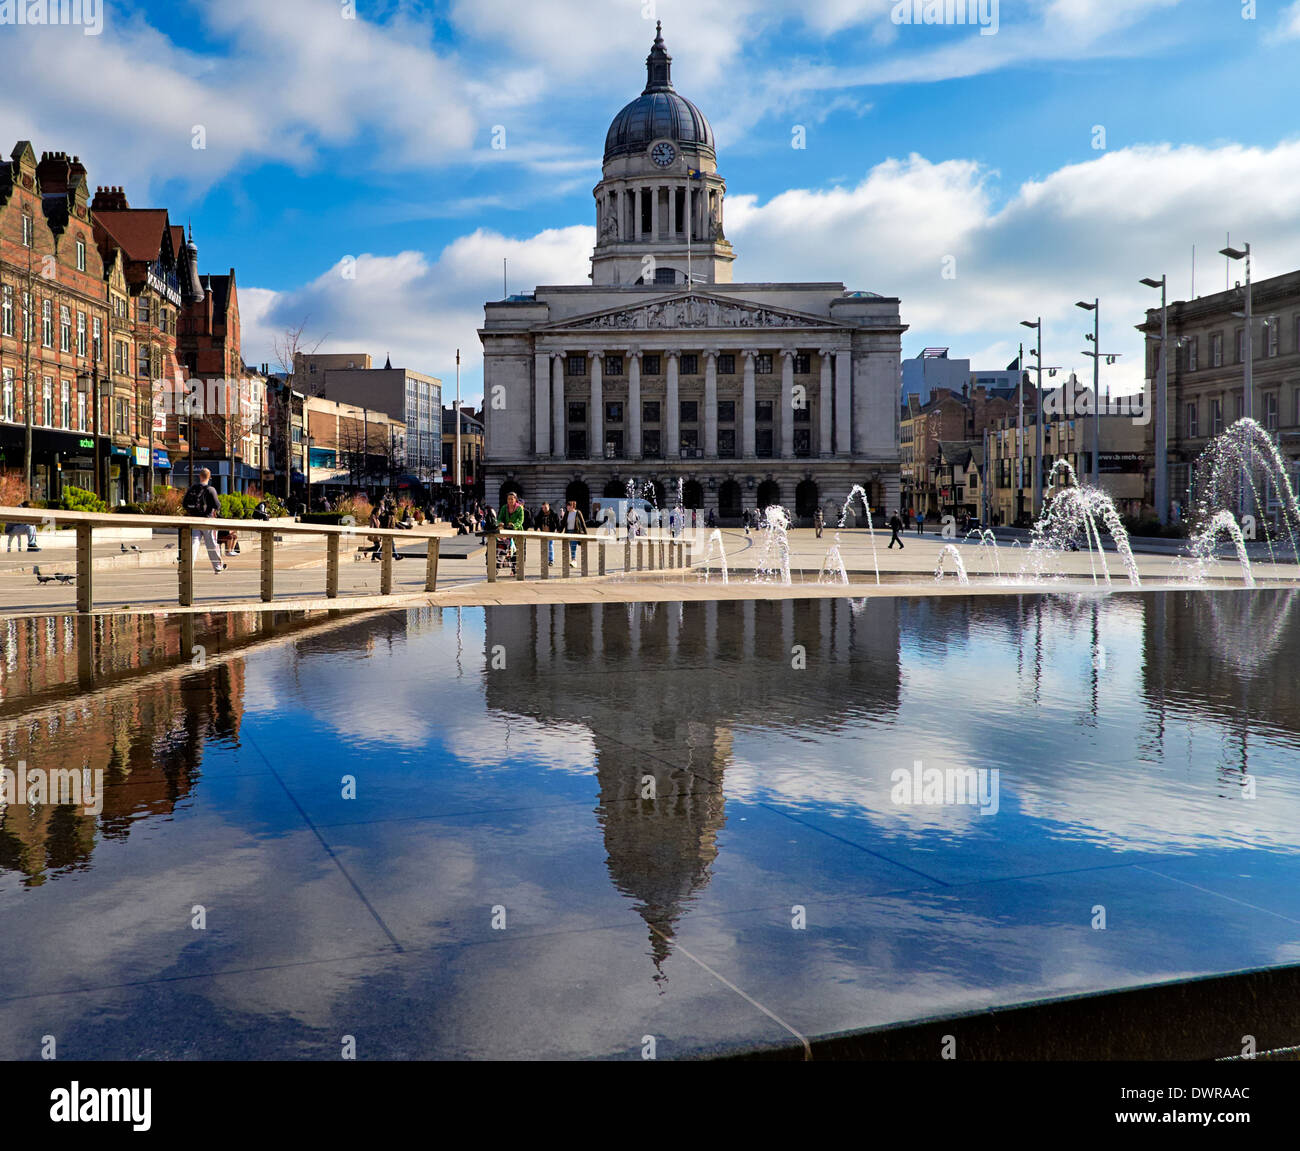 Nottingham England uk. Fountain Water feature in the old market square with the council house in the background. Stock Photo